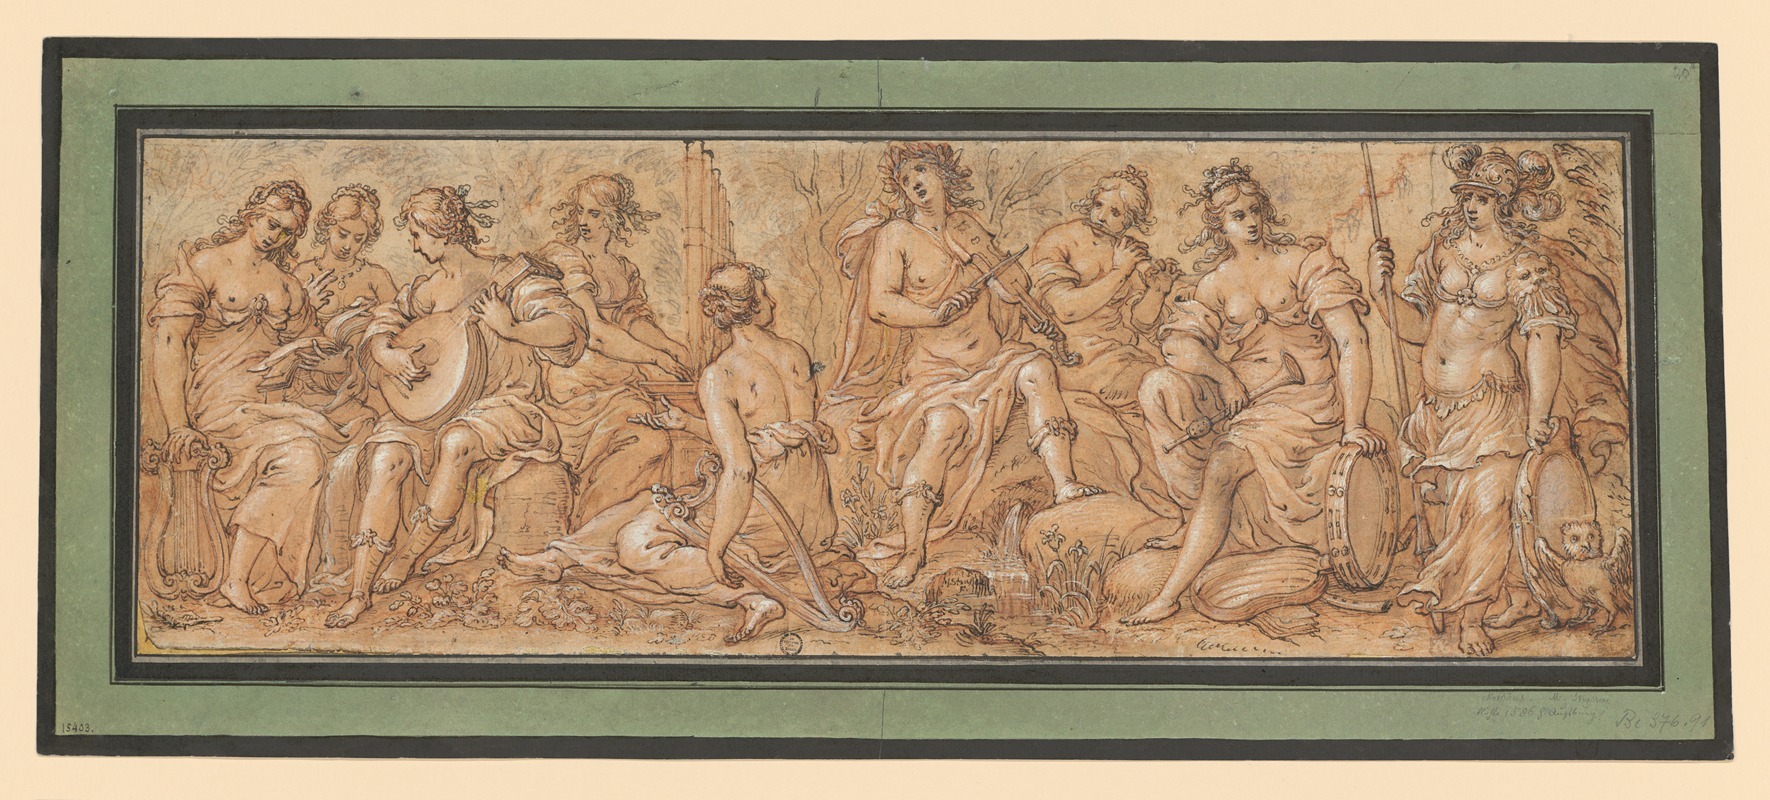 Mathias Strasser - Frieze with Apollo, Minerva and Muses